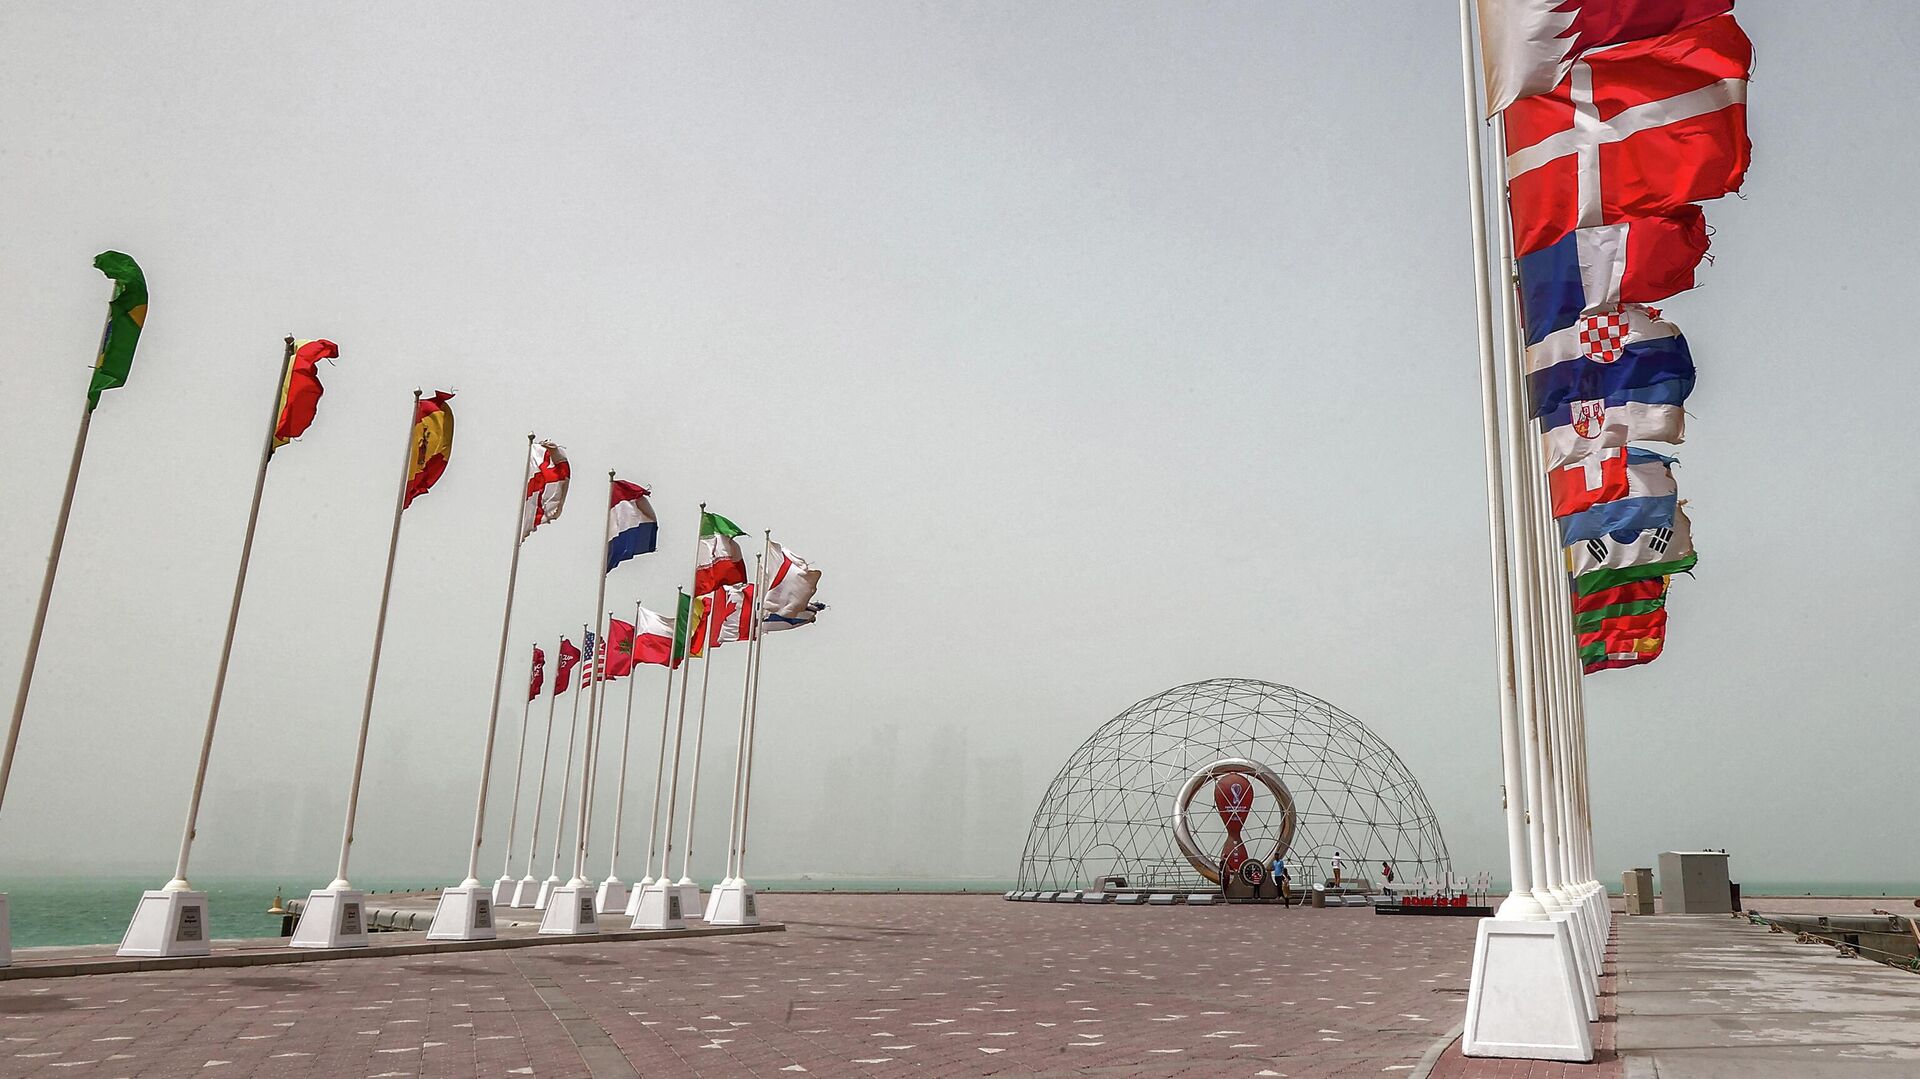 The flags of nations taking part in the Qatar 2022 FIFA World Cup fly Qatar's capital Doha during a heavy dust storm on May 17, 2022 as the skyline behind is obscured in the haze. - Sputnik International, 1920, 28.05.2022